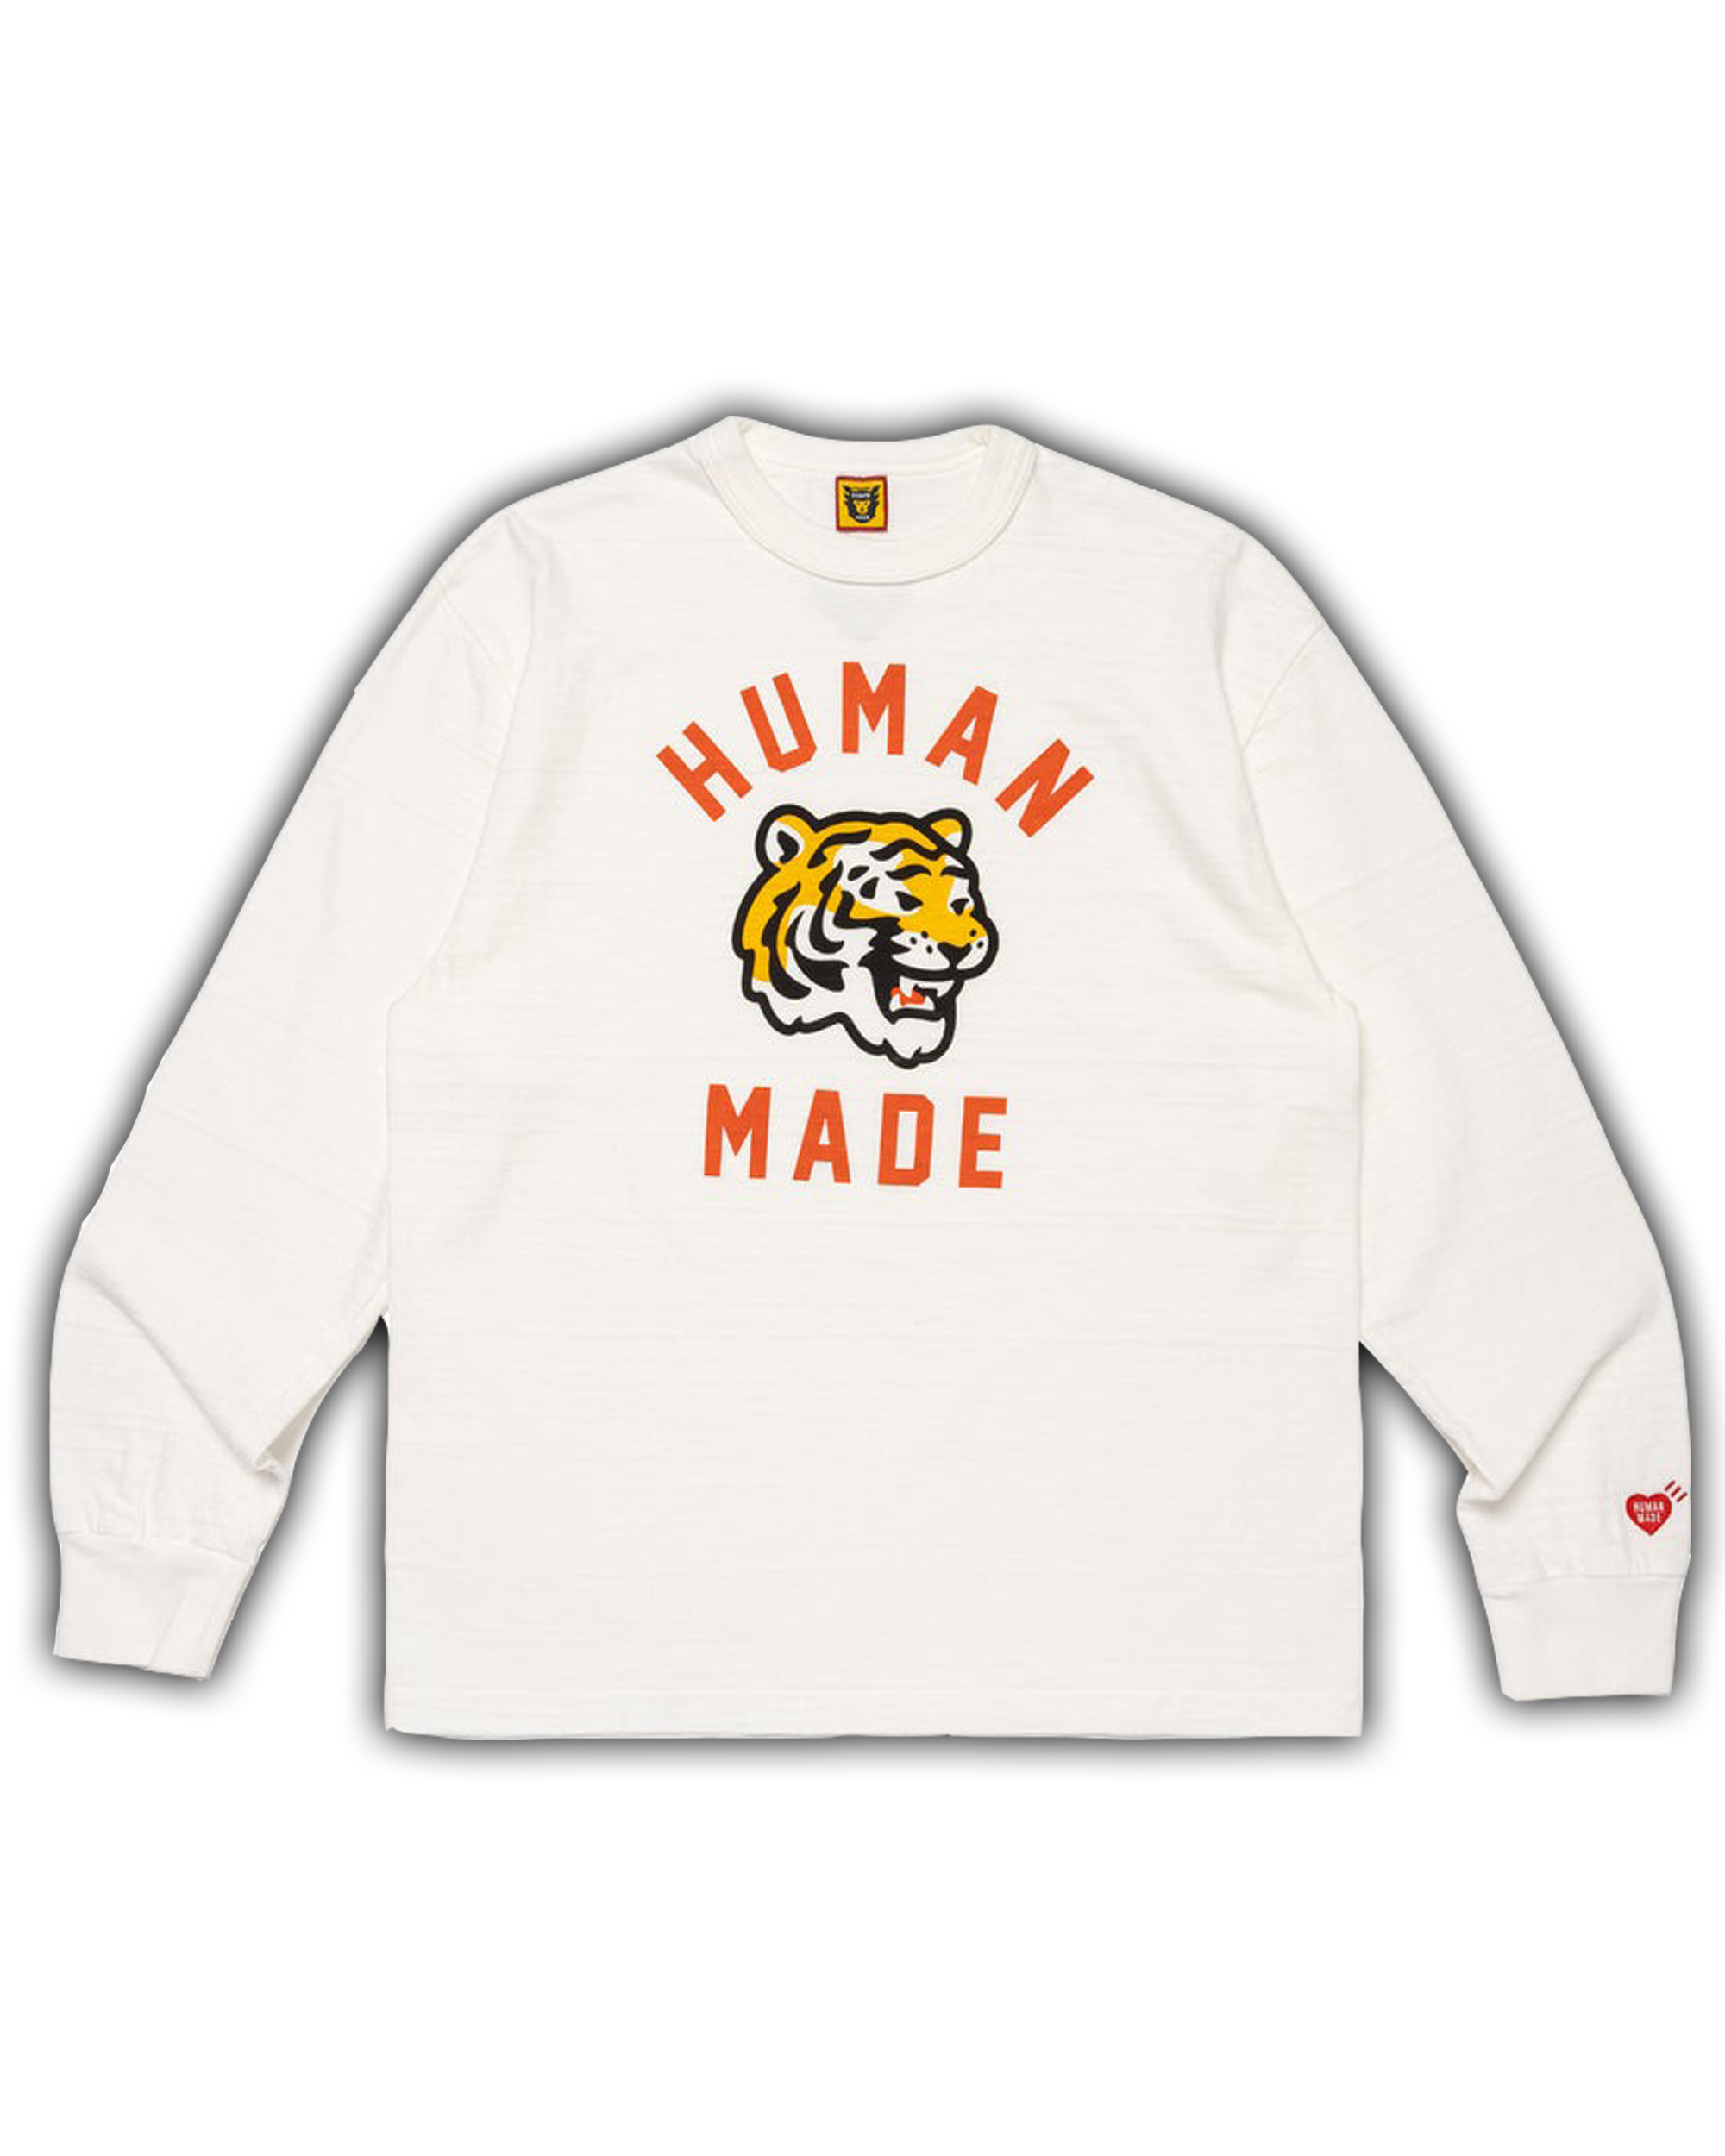 Human Made Graphic L/S T-Shirt - HUMAN MADE OFFICIAL